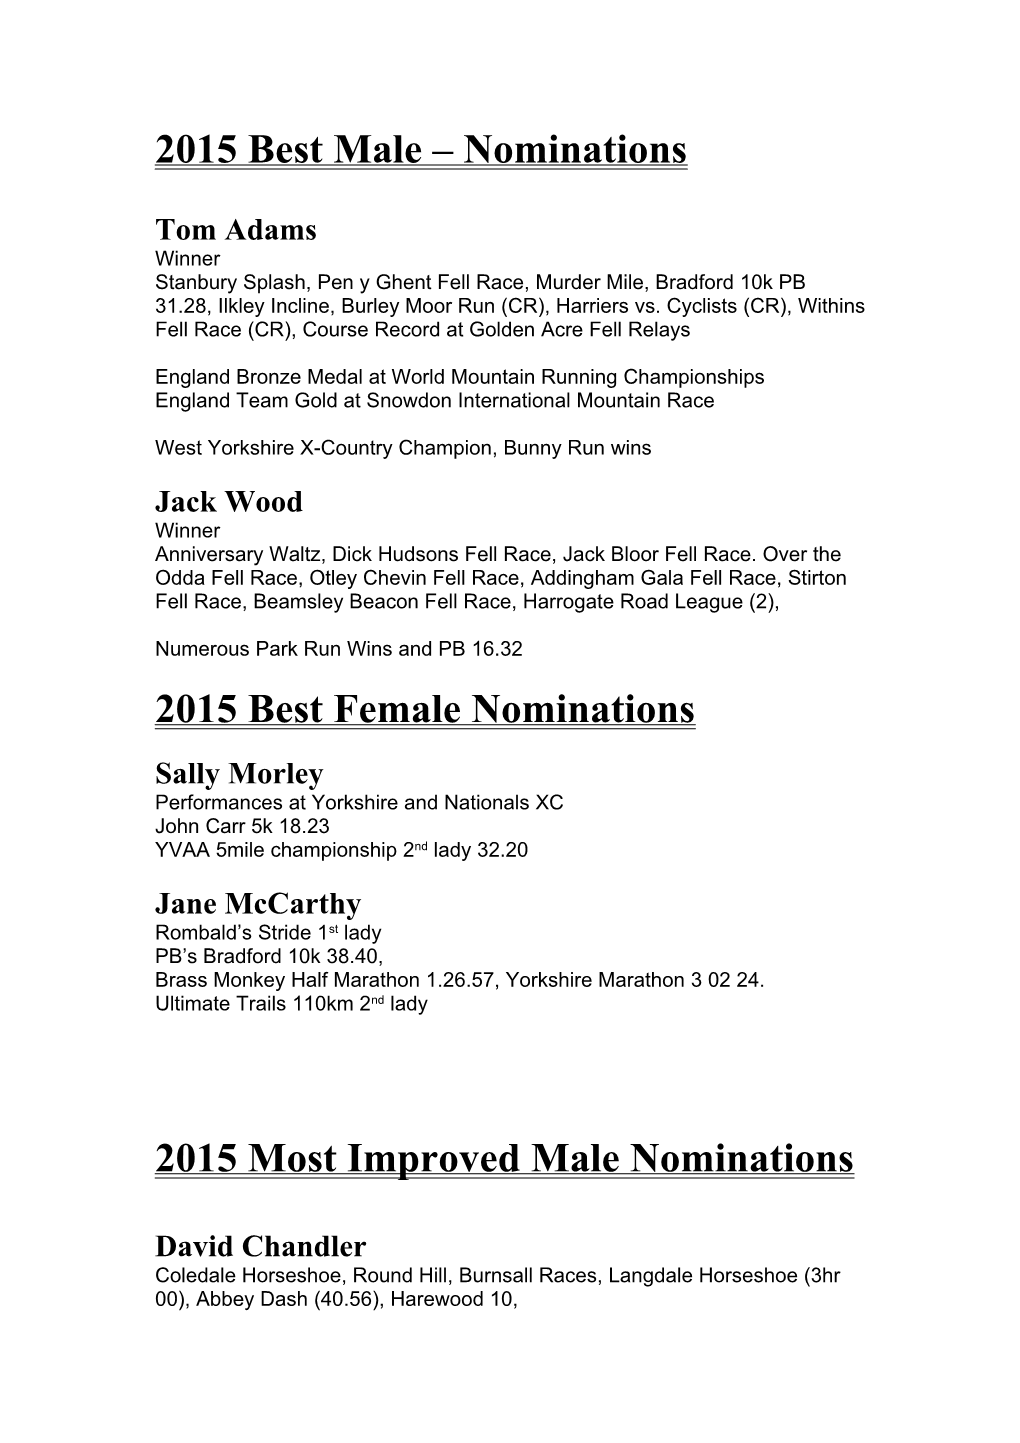 2015 Best Male Nominations